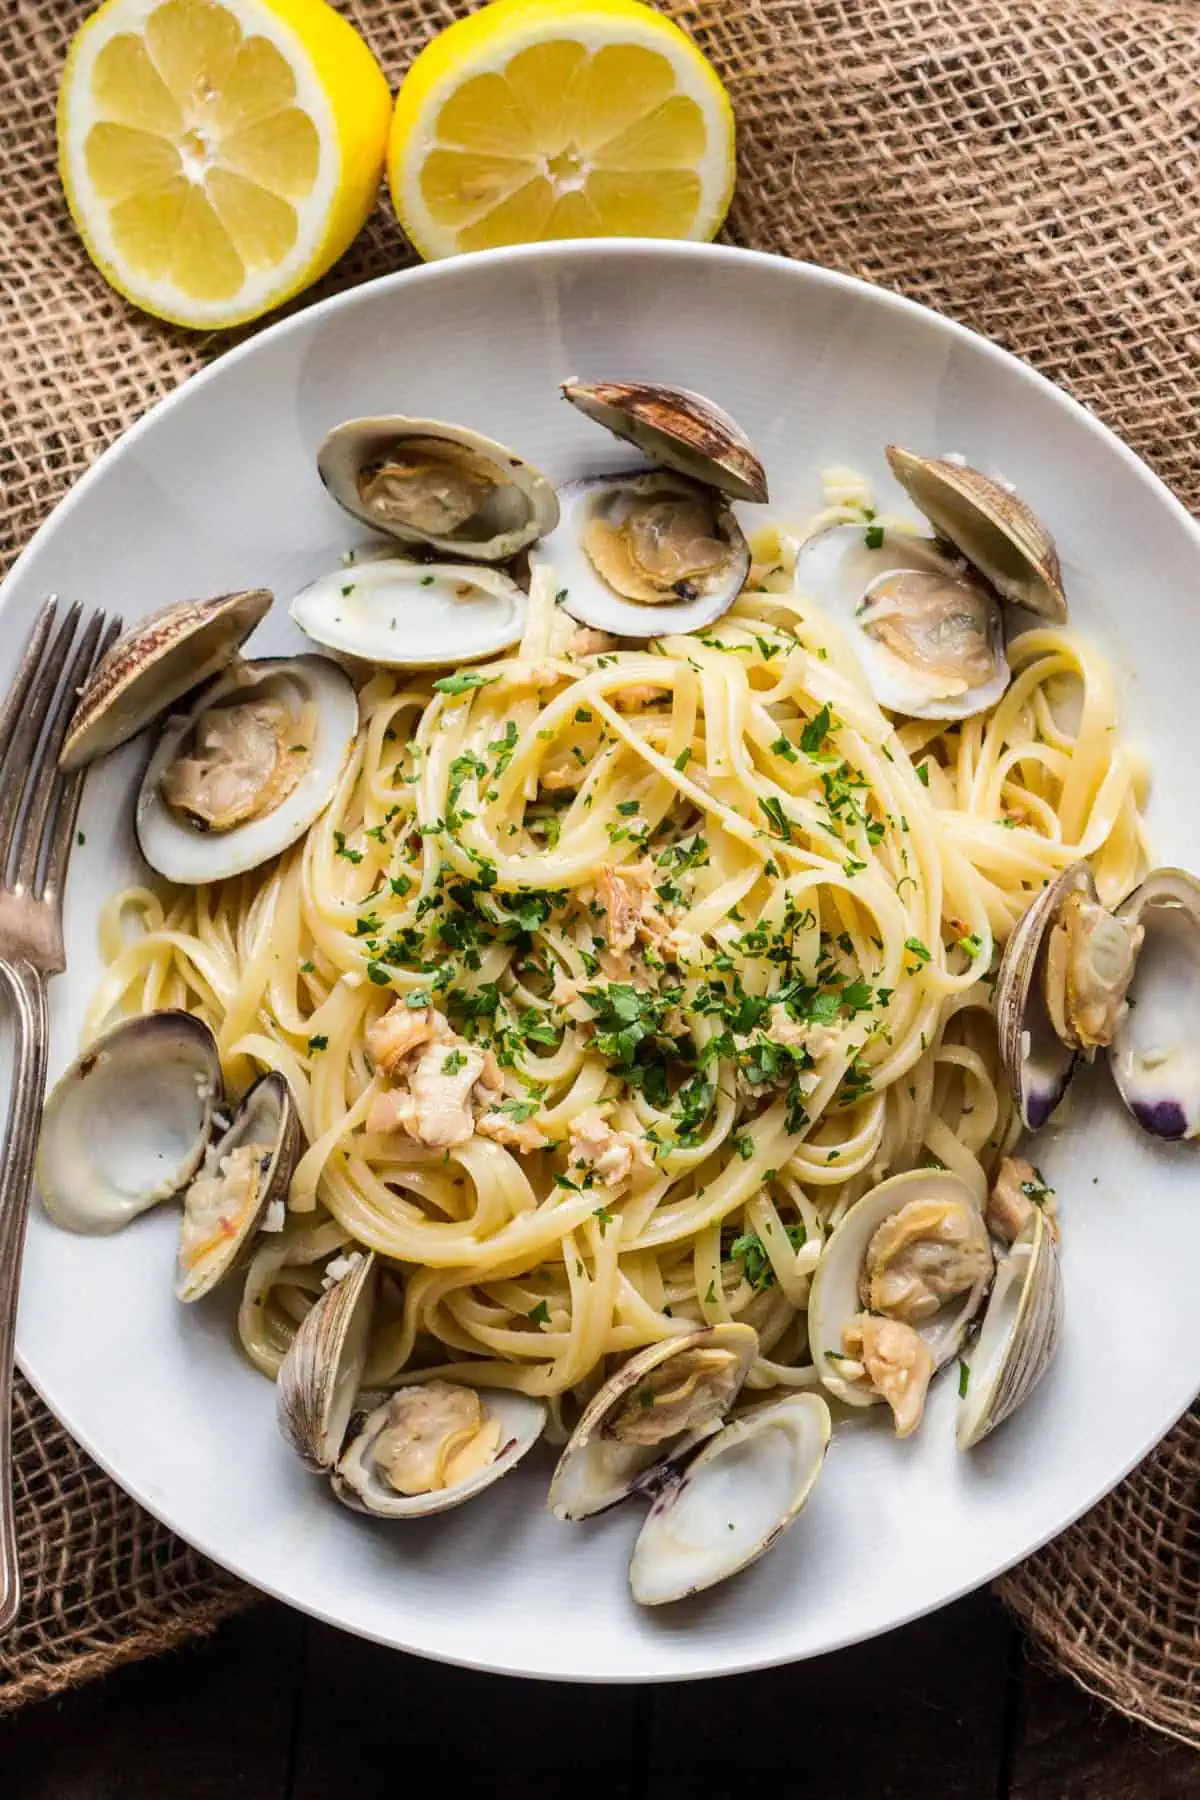 Quick and easy dinner idea: Clams and pasta served on a white plate with lemon wedges.